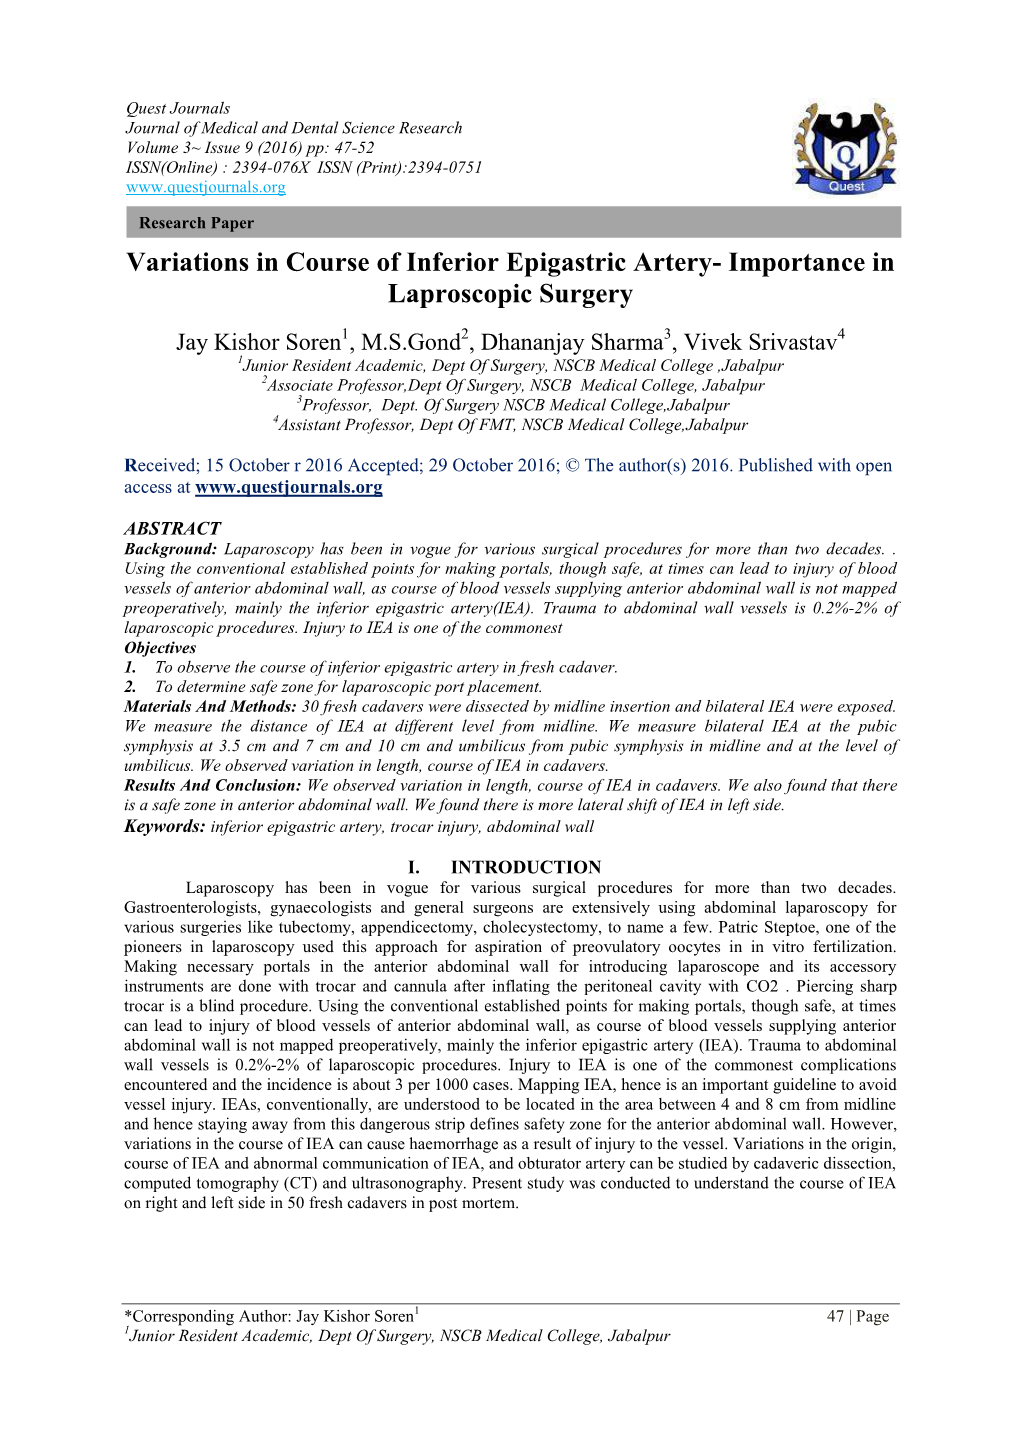 Variations in Course of Inferior Epigastric Artery- Importance in Laproscopic Surgery